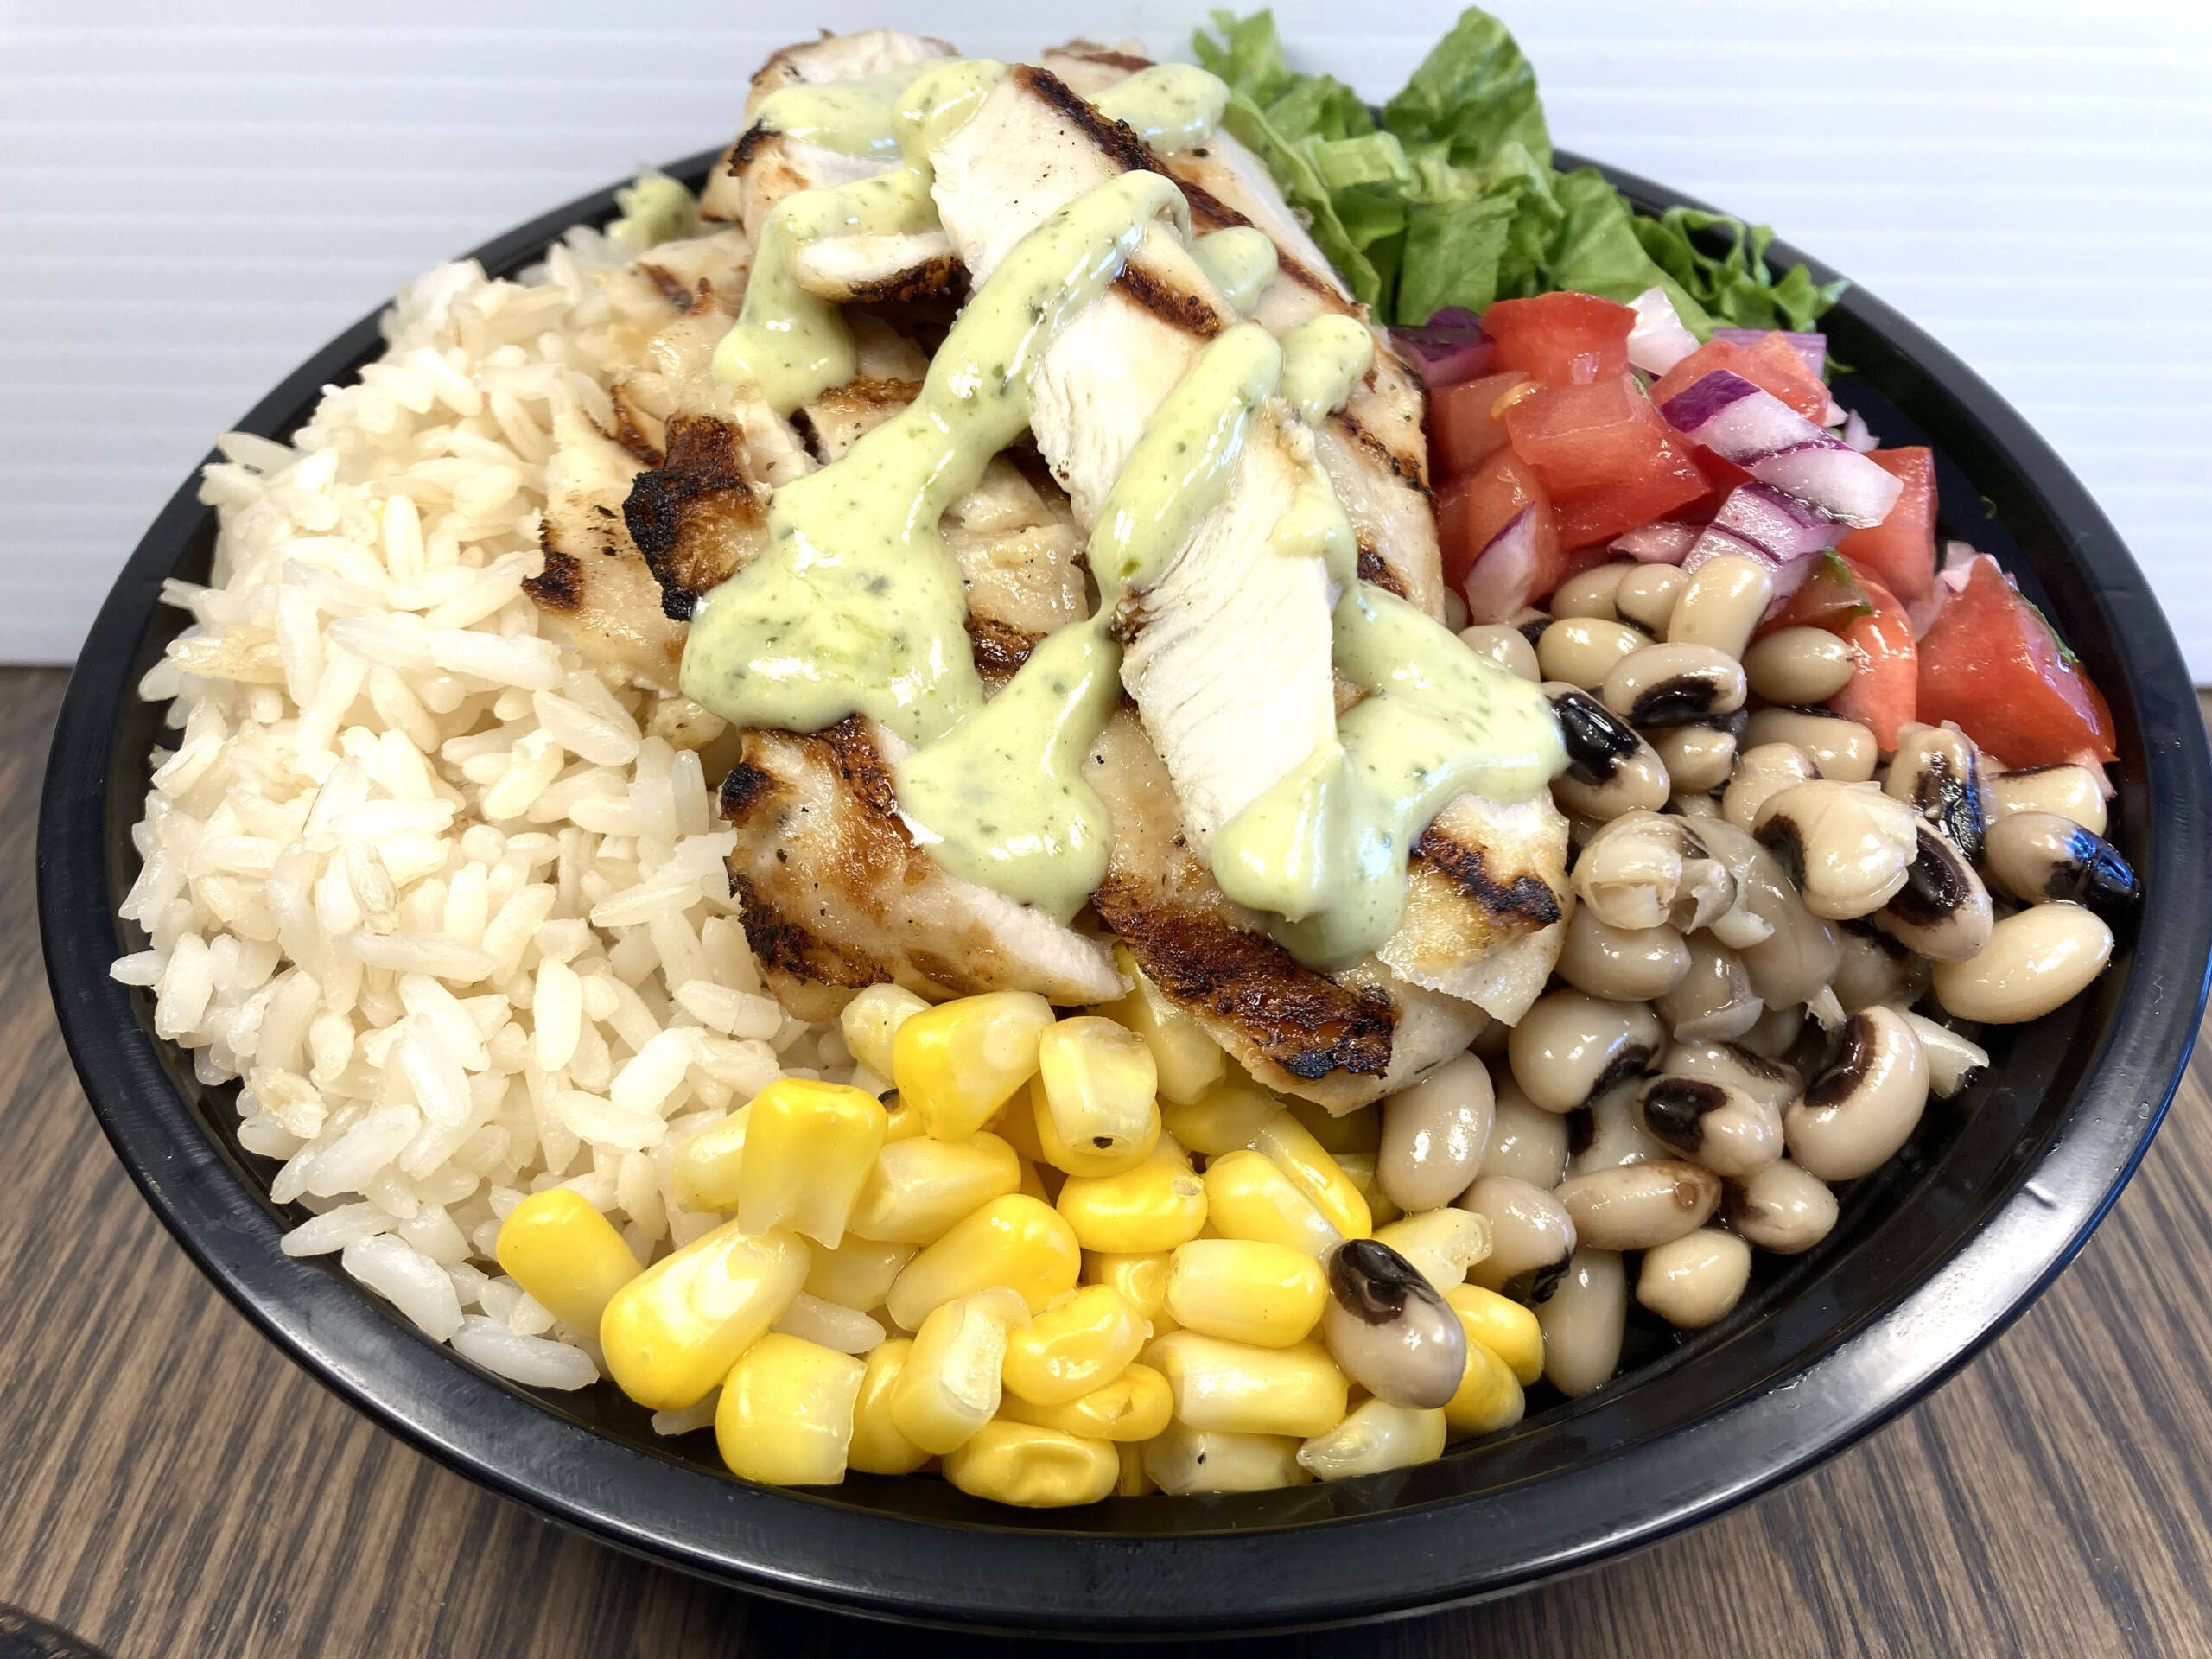 Grilled chicken bowl served with Mediterranean Rice, Romaine Lettuce, Corn, Black Eyed Beans, Diced Tomato, Diced Red Onions, Cilantro, and Fresh Herb & Cream Sauce